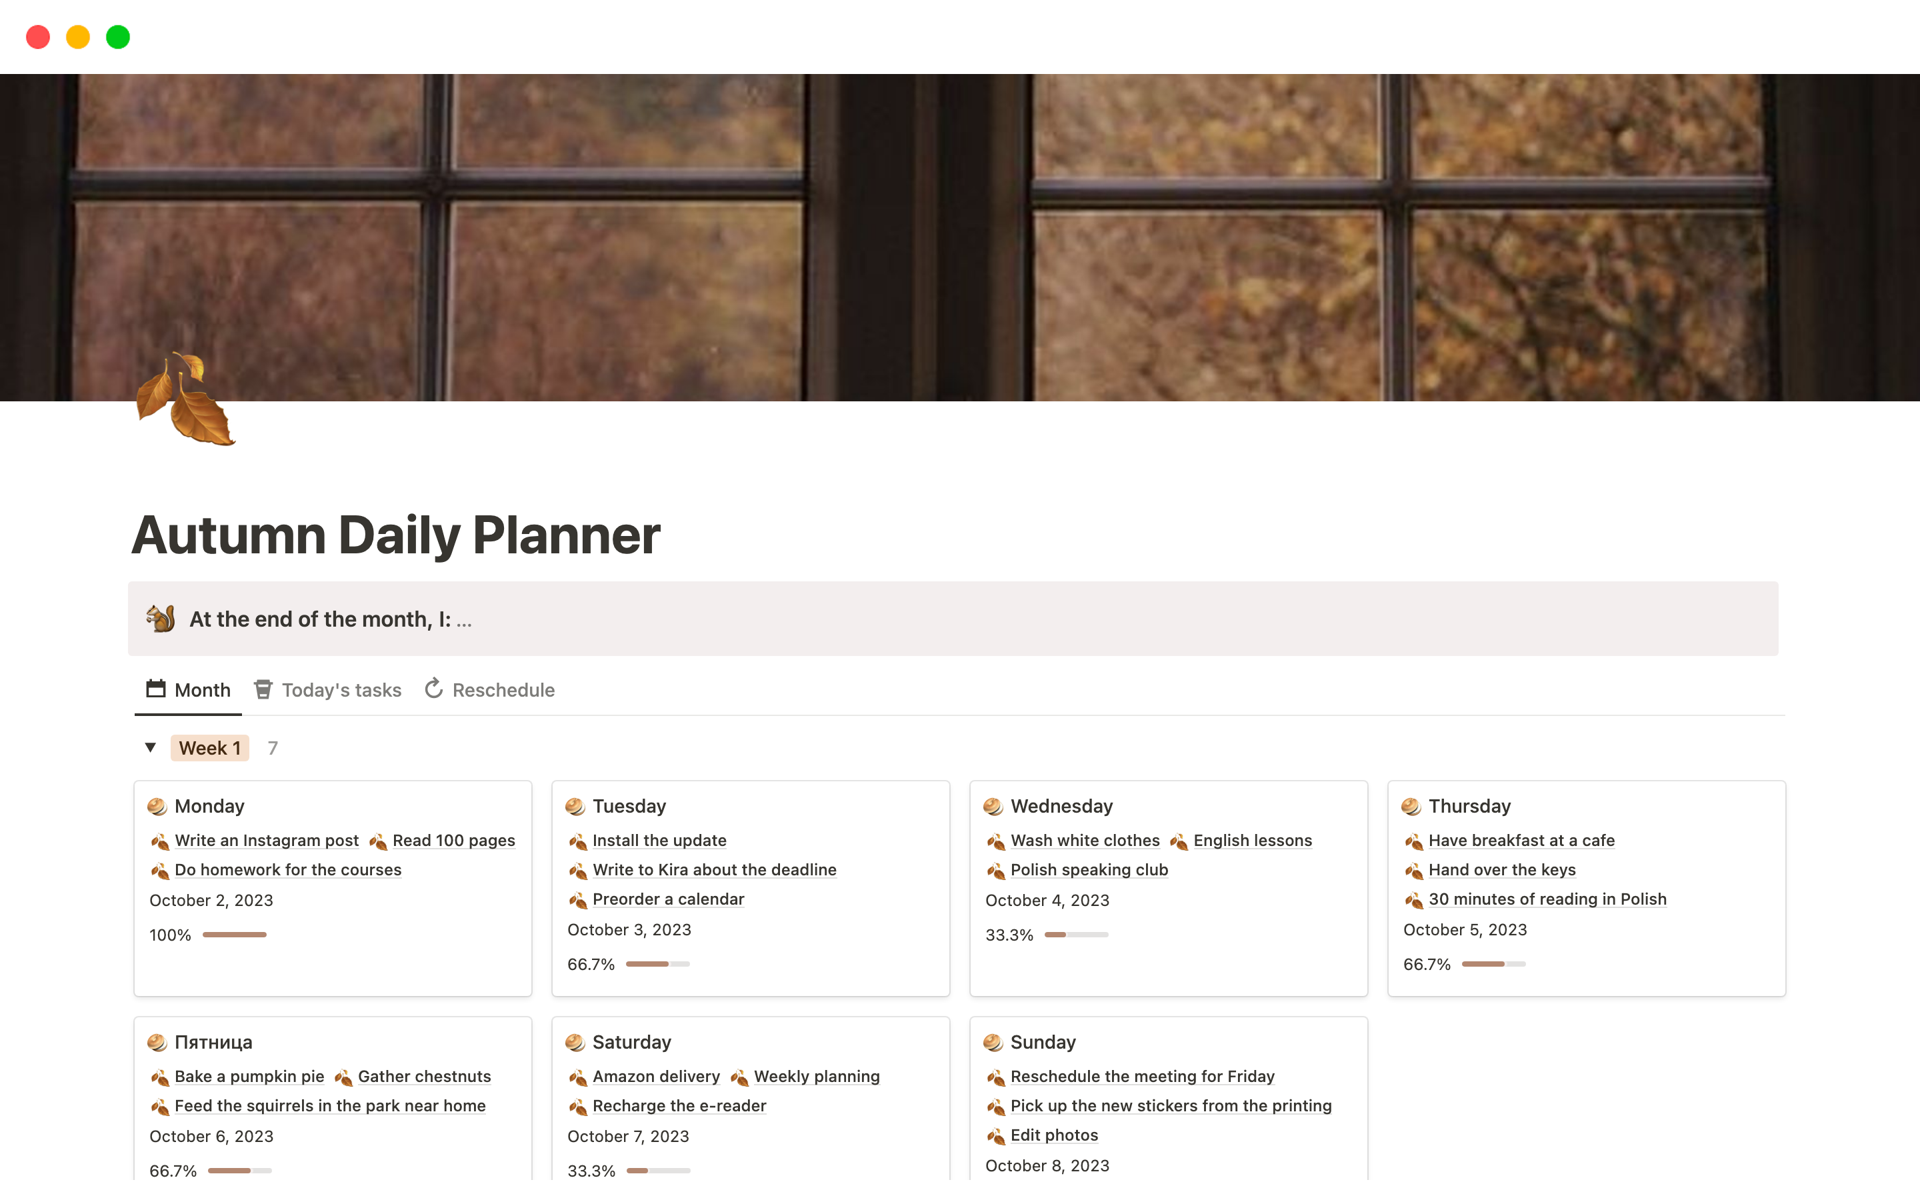 It's cozy autumn monthly planner to help complete all tasks on time🐿